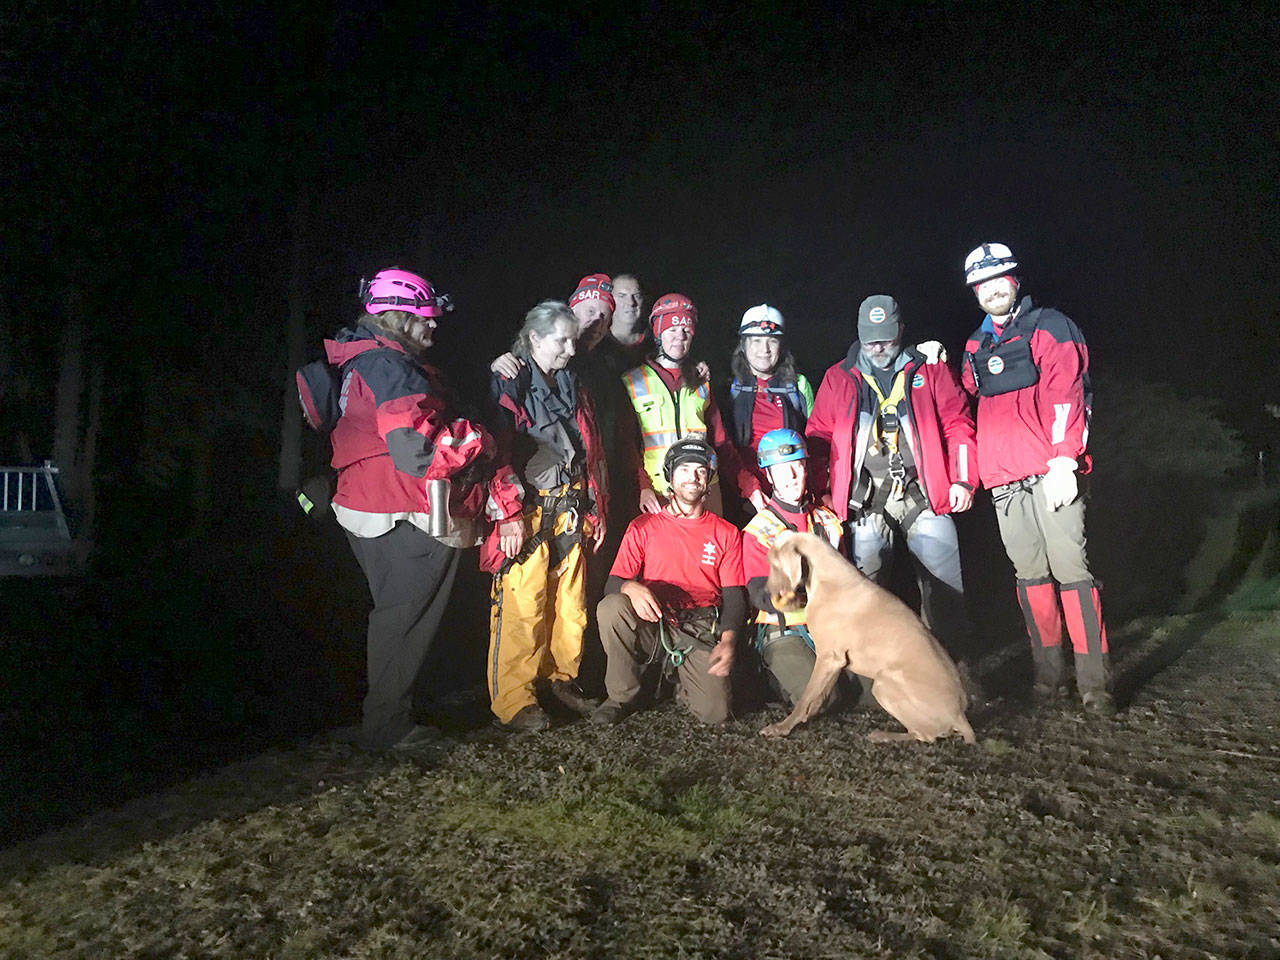 Clallam County Sheriff’s Office Search and Rescue Team members stand with a 70-pound dog they rescued from a bluff west of Port Angeles on Wednesday. (Clallam County Sheriff’s Office)